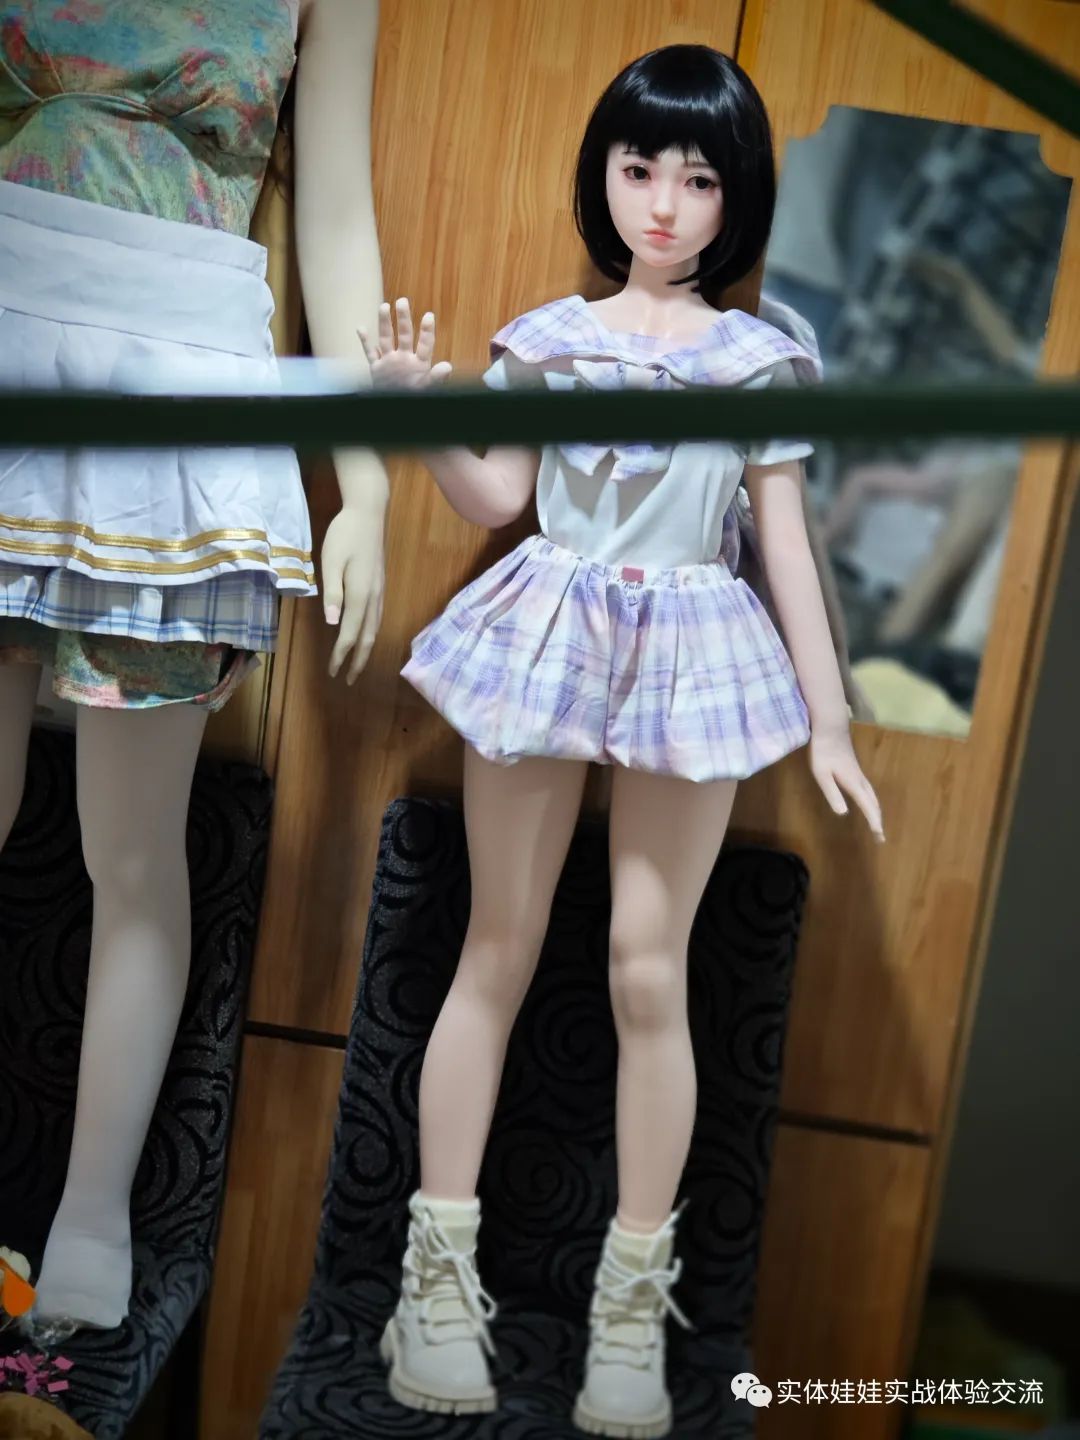 Buying physical dolls is safer